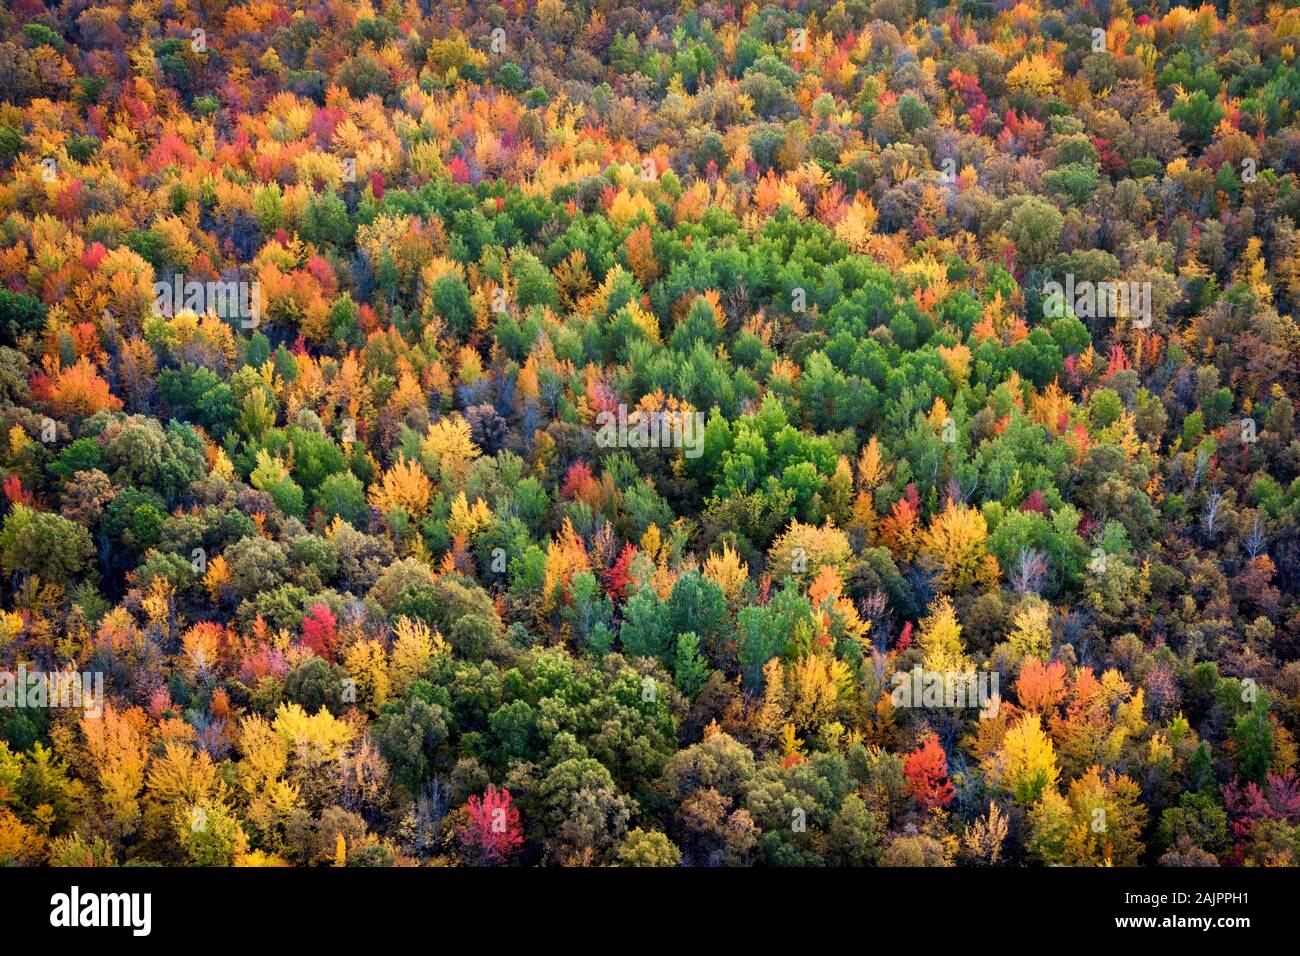 Autumn season background, aerial view of lush maple tree forest showing leaves changing colour during fall season in Quebec, Canada. Stock Photo